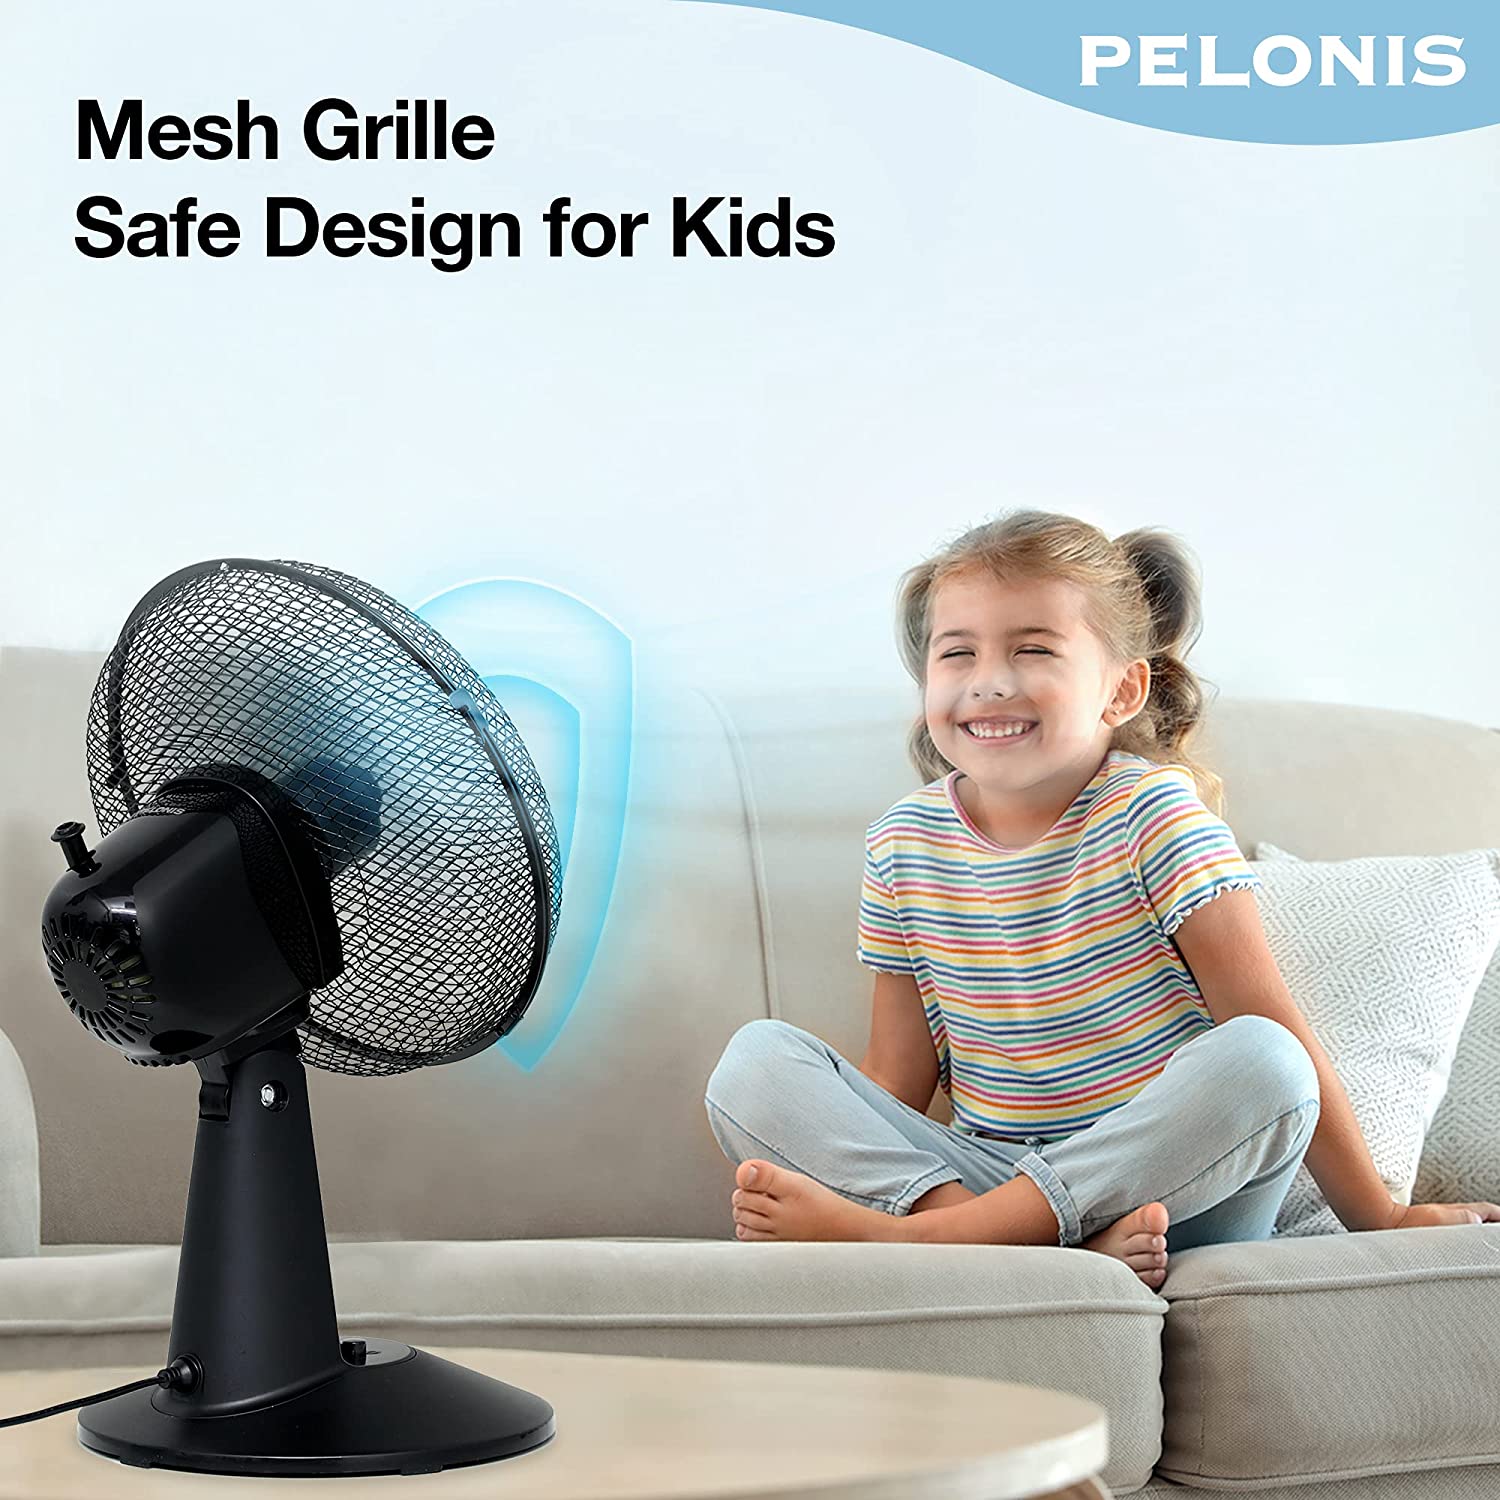 PELONIS Portable Desk Fan 10-Inch / 25cm with 3 Speed 85º Oscillation, 30W Electric Table Fan, Adjustable Head Low Noise, Strong Resistant Base for Home and Office